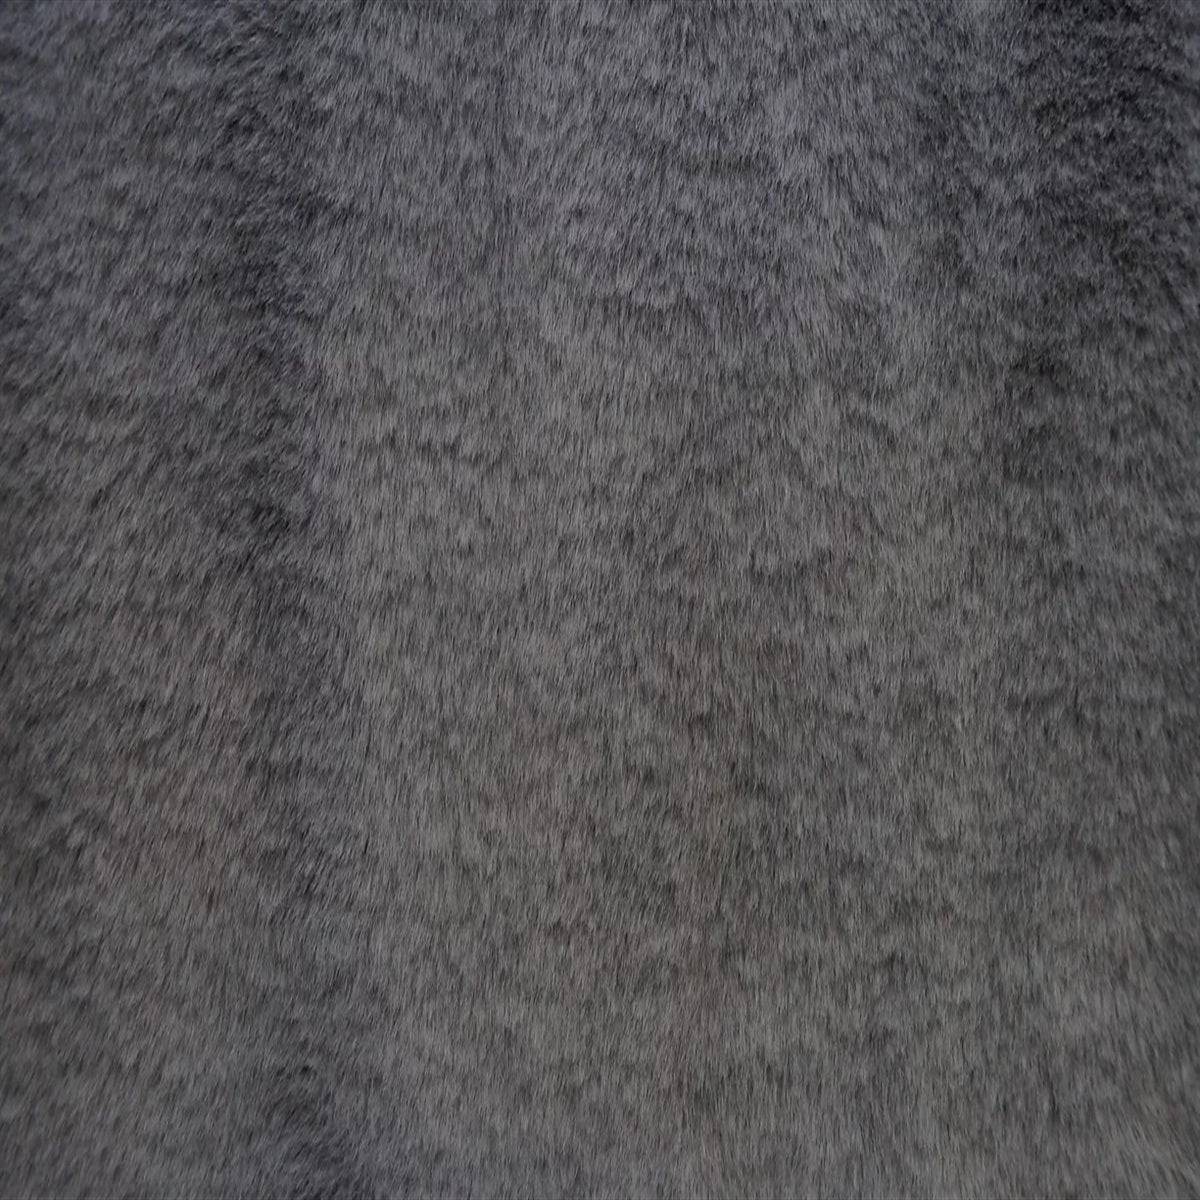 Bunny Thick Minky Fabric By The Roll (20 Yards)ICE FABRICSICE FABRICSCharcoalBy The Yard (60 inches Wide)Bunny Thick Minky Fabric By The Roll (20 Yards) ICE FABRICS Charcoal